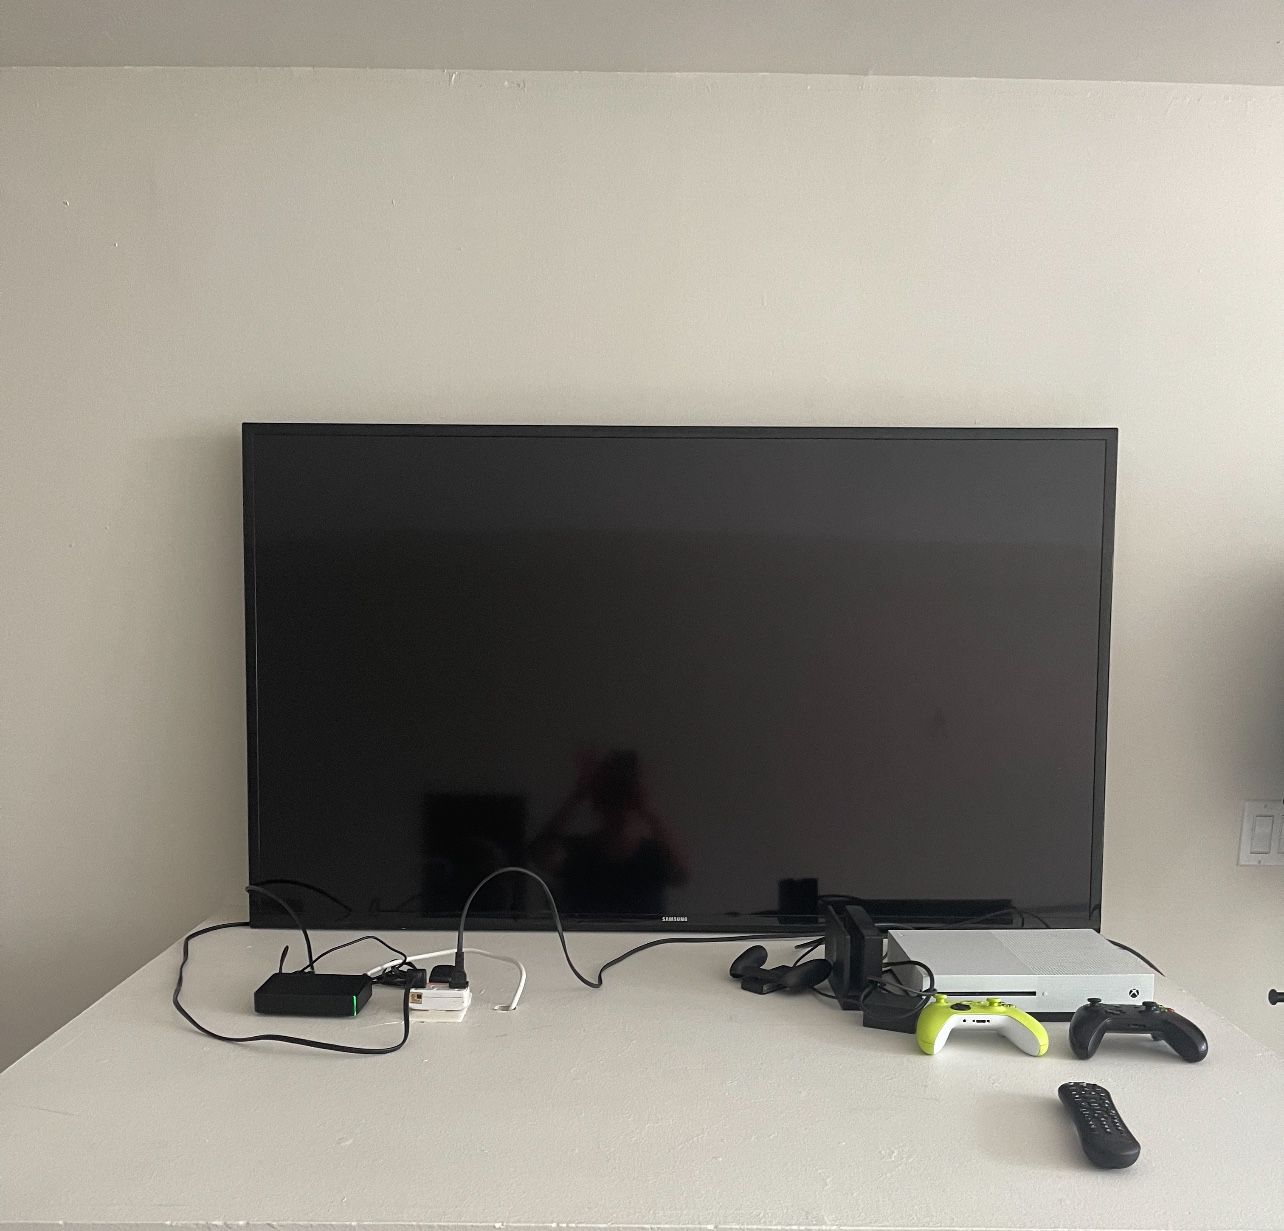 Samsung 60 inch smart TV (no base or wall mount) previously wall mounted 